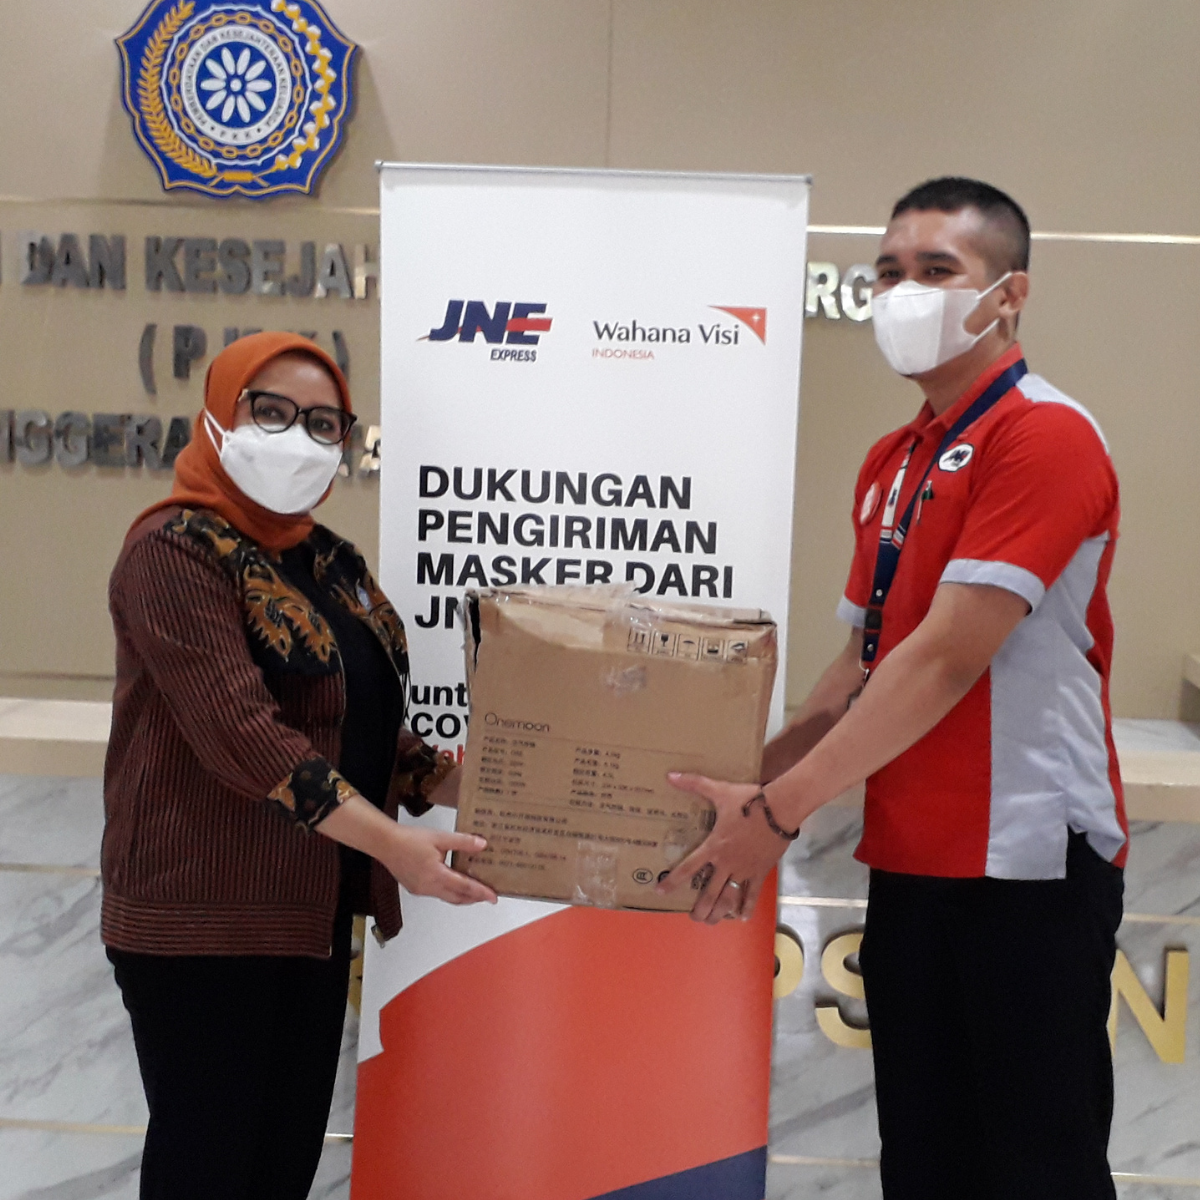 JNE’s Support for COVID-19 Response in Indonesia